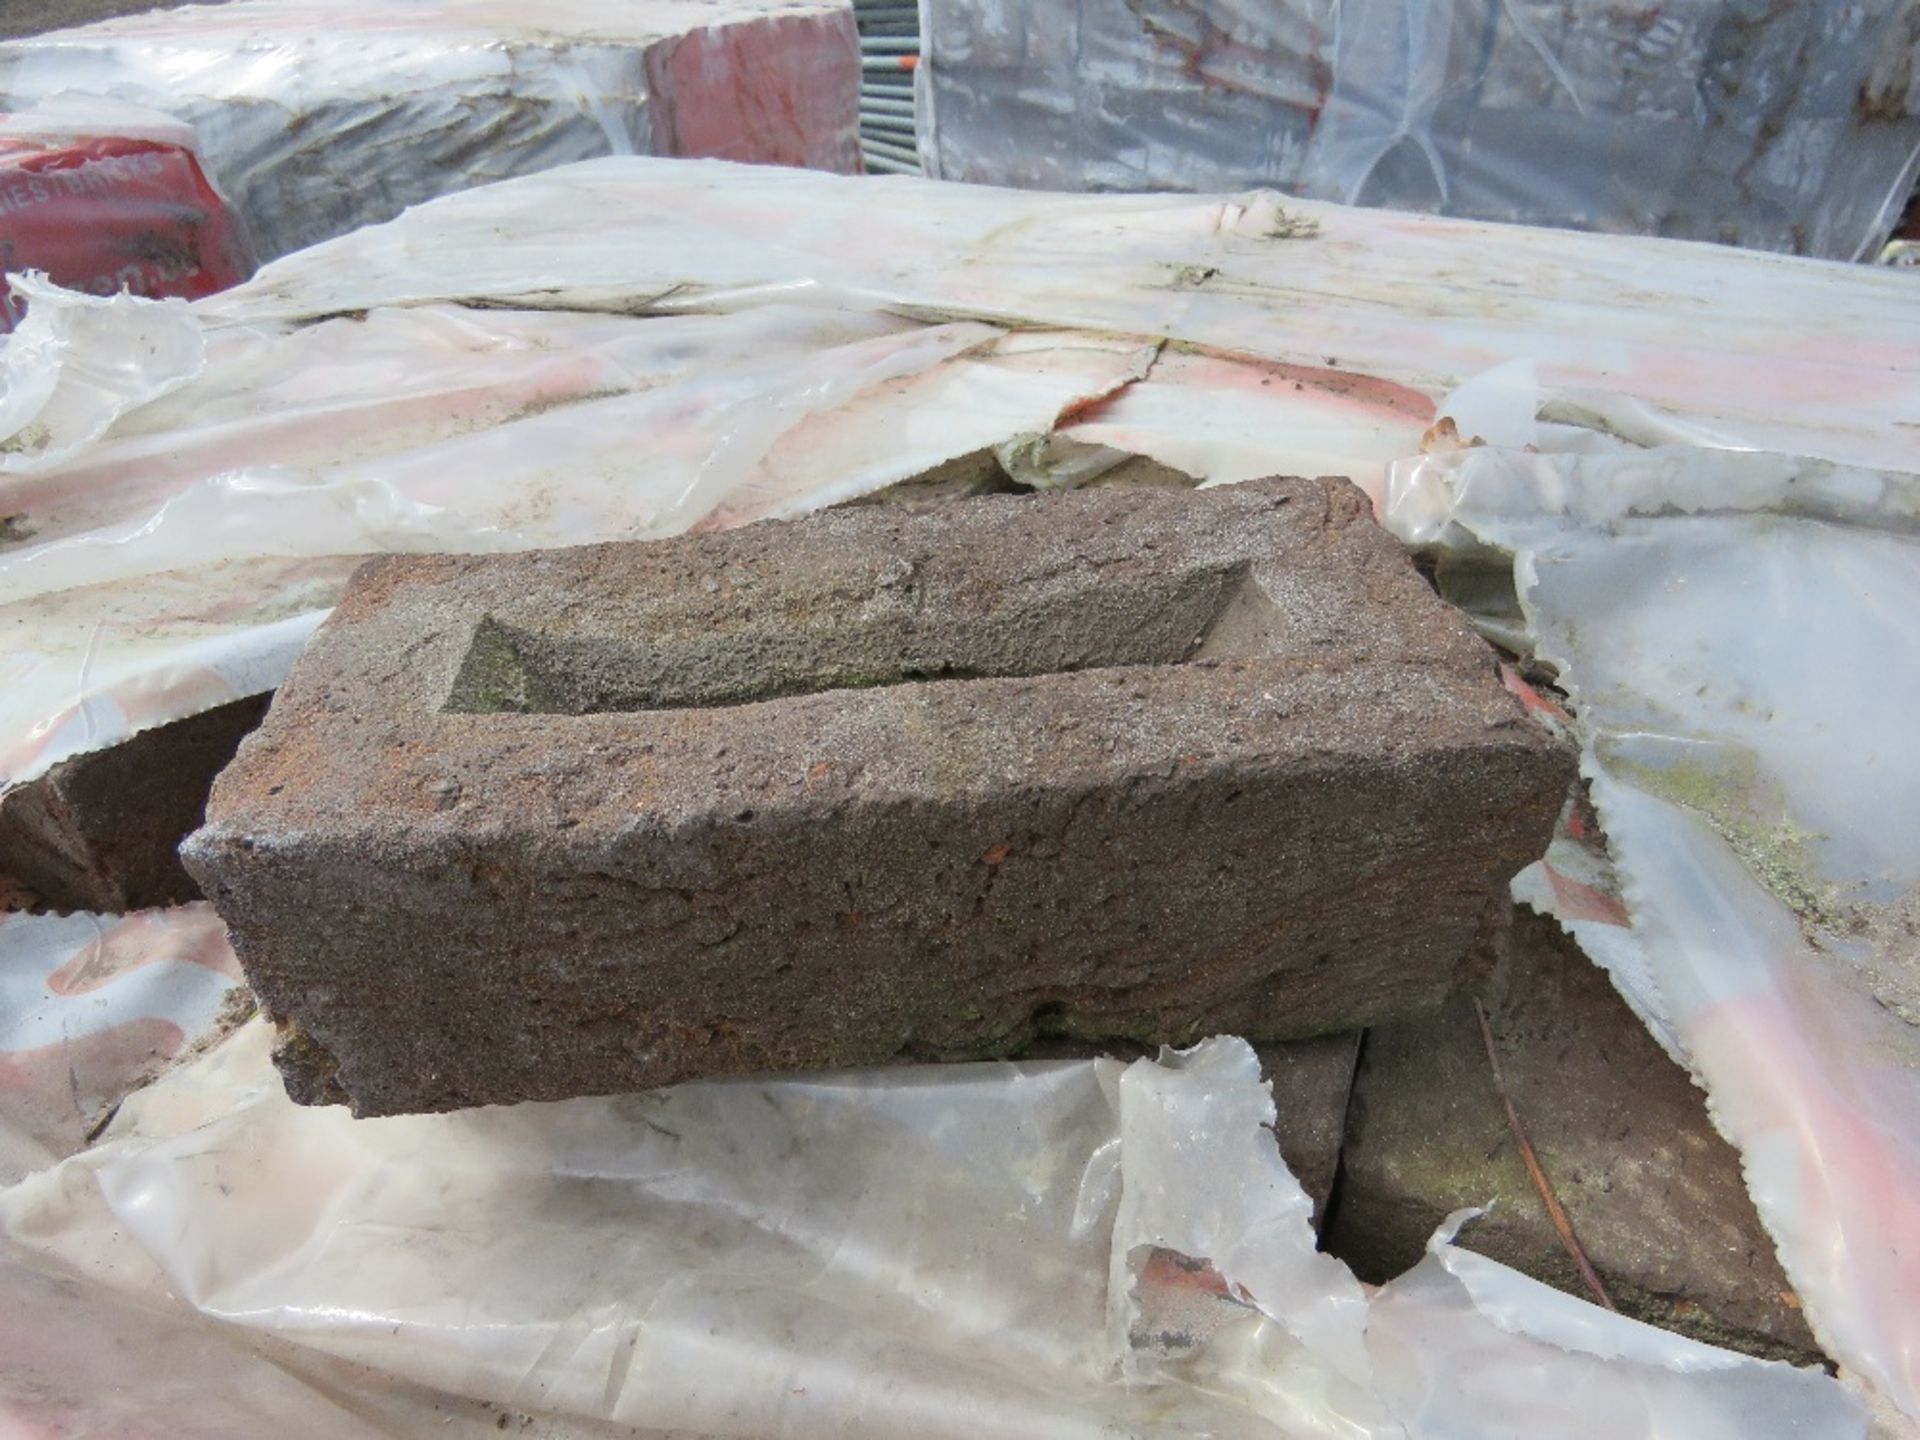 3 X PACKS OF RUSHINGTON ANTIQUE (DALI) BRICKS, CODE T33. BELIEVED TO BE 730NO IN EACH PACK. THIS - Image 11 of 17